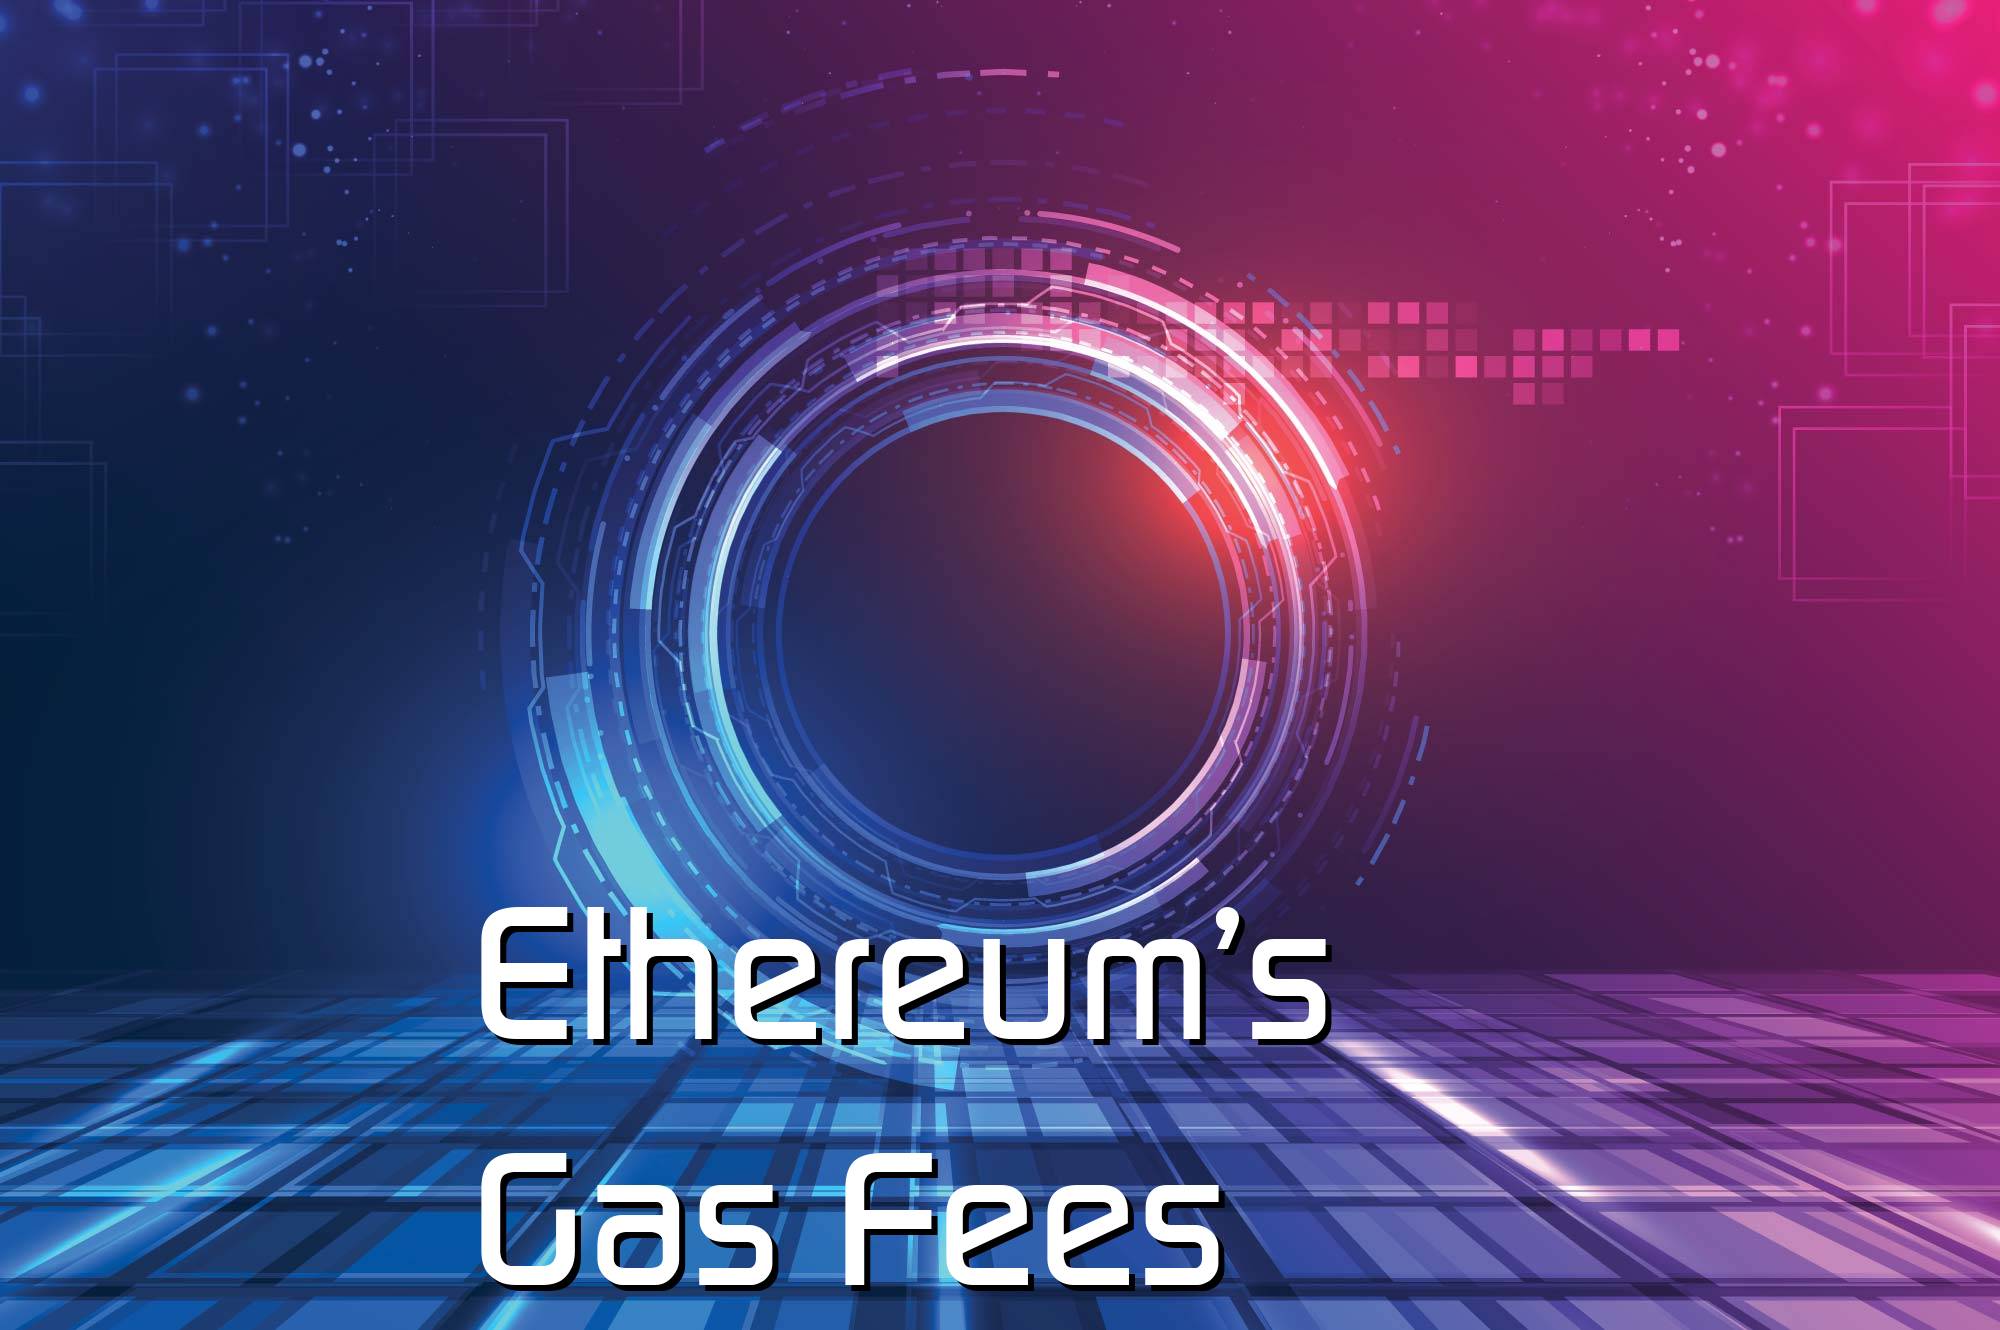 @$65475: Ethereum’s Gas Fees Plummet while Prices SoarThere has been a sharp drop in Ethereum’s